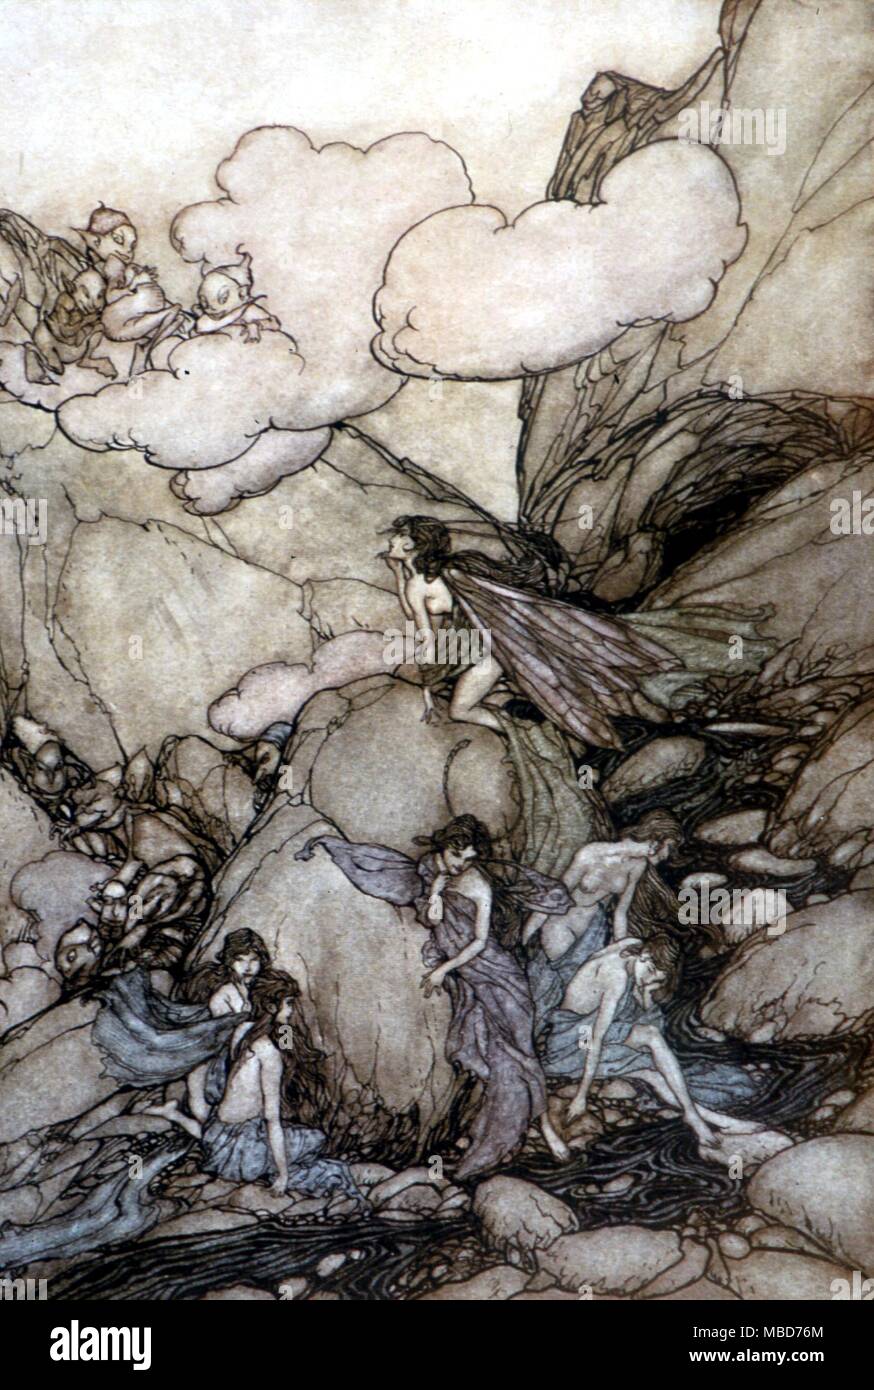 Fairies - Rip Van Winkle - specimen print for Arthur Rackham's Rip Van Winkle - printed by Hentschell-colourtype in 1905 - The story of Rip Van Winkle who fell asleep in the Catskill mountains after drinking a mysterious brew acquired from some strange little men, and then awoke 20 years later - Stock Photo